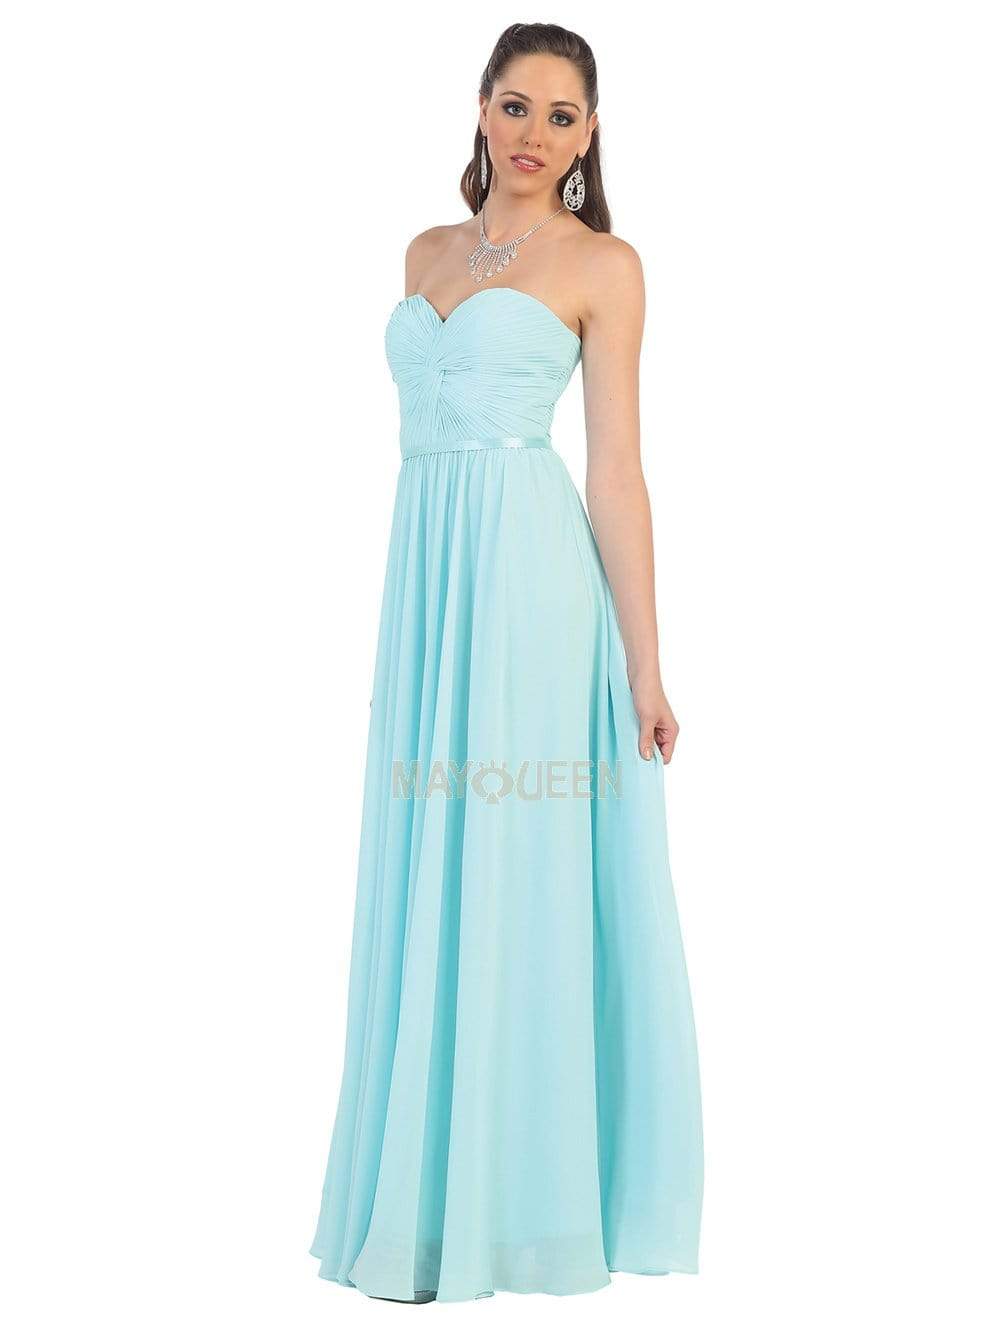 May Queen - MQ1145 Strapless Sweetheart Ruched Bodice A-Line Gown